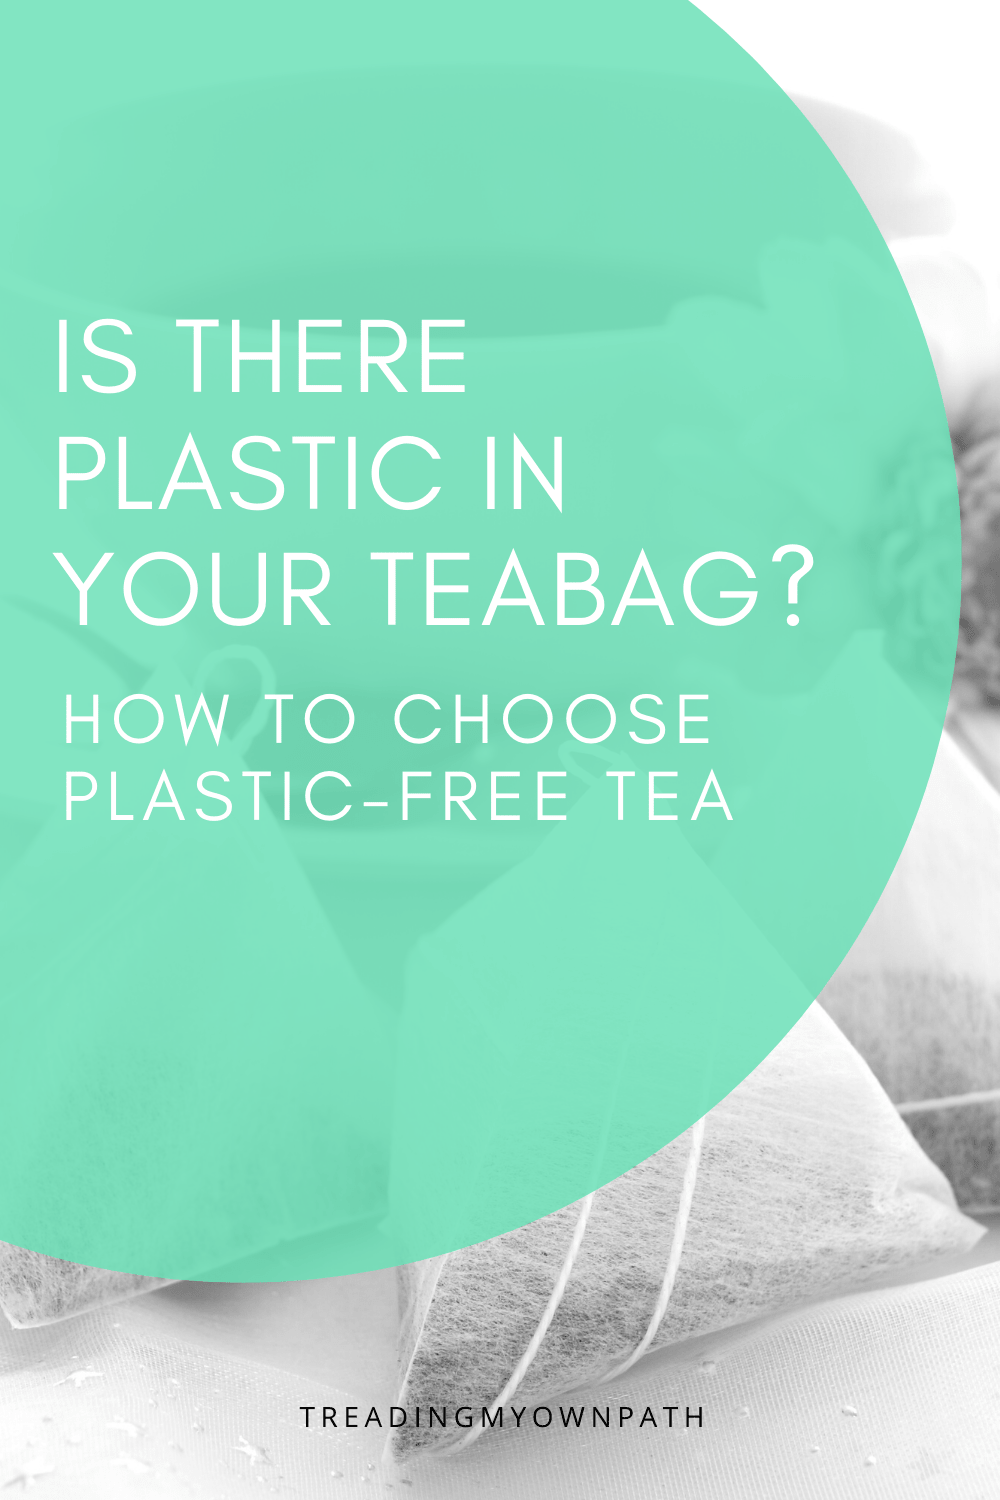 Is there plastic in your teabag?